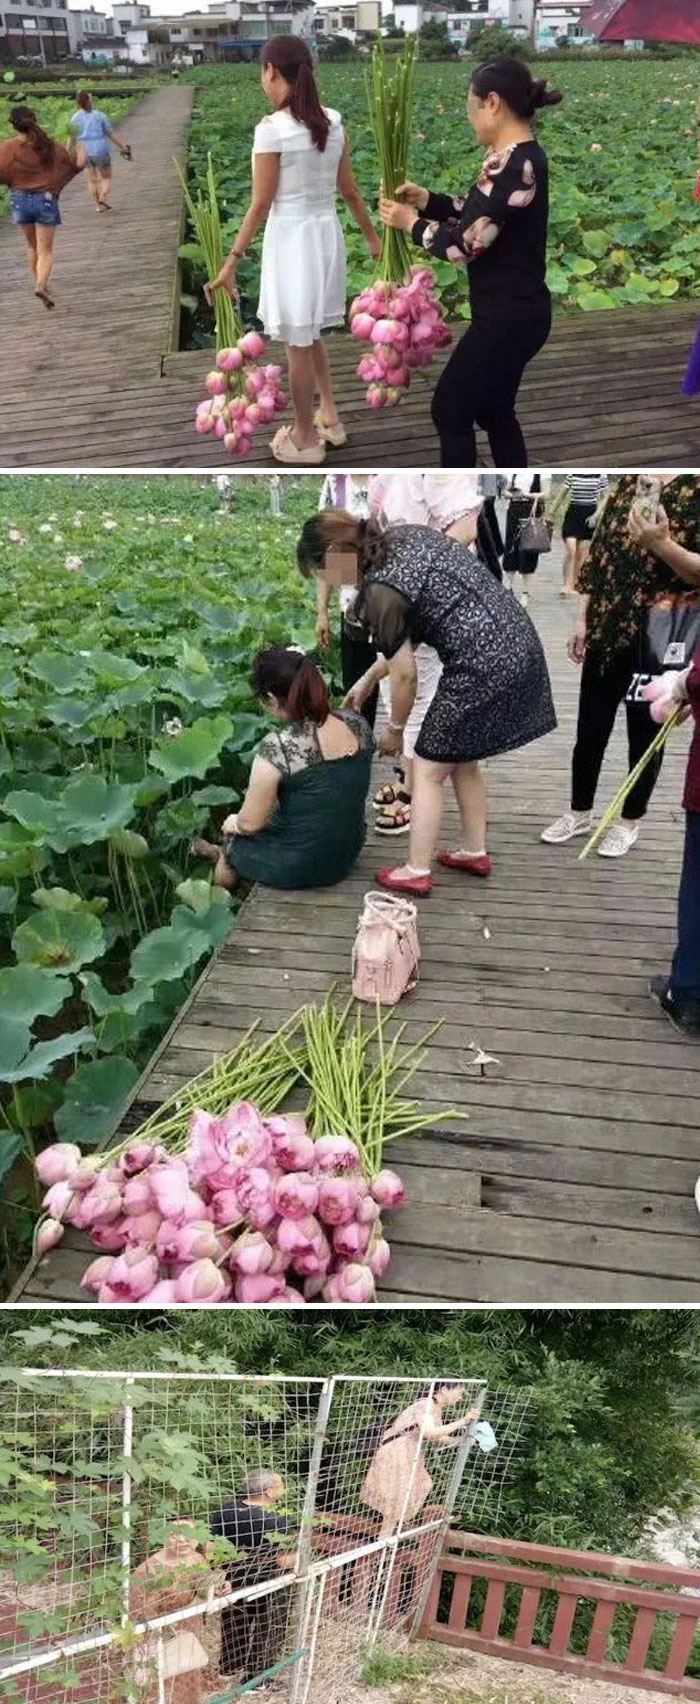 Tourists Break Into Eco Park And Strip Away All Its Lotus Flowers